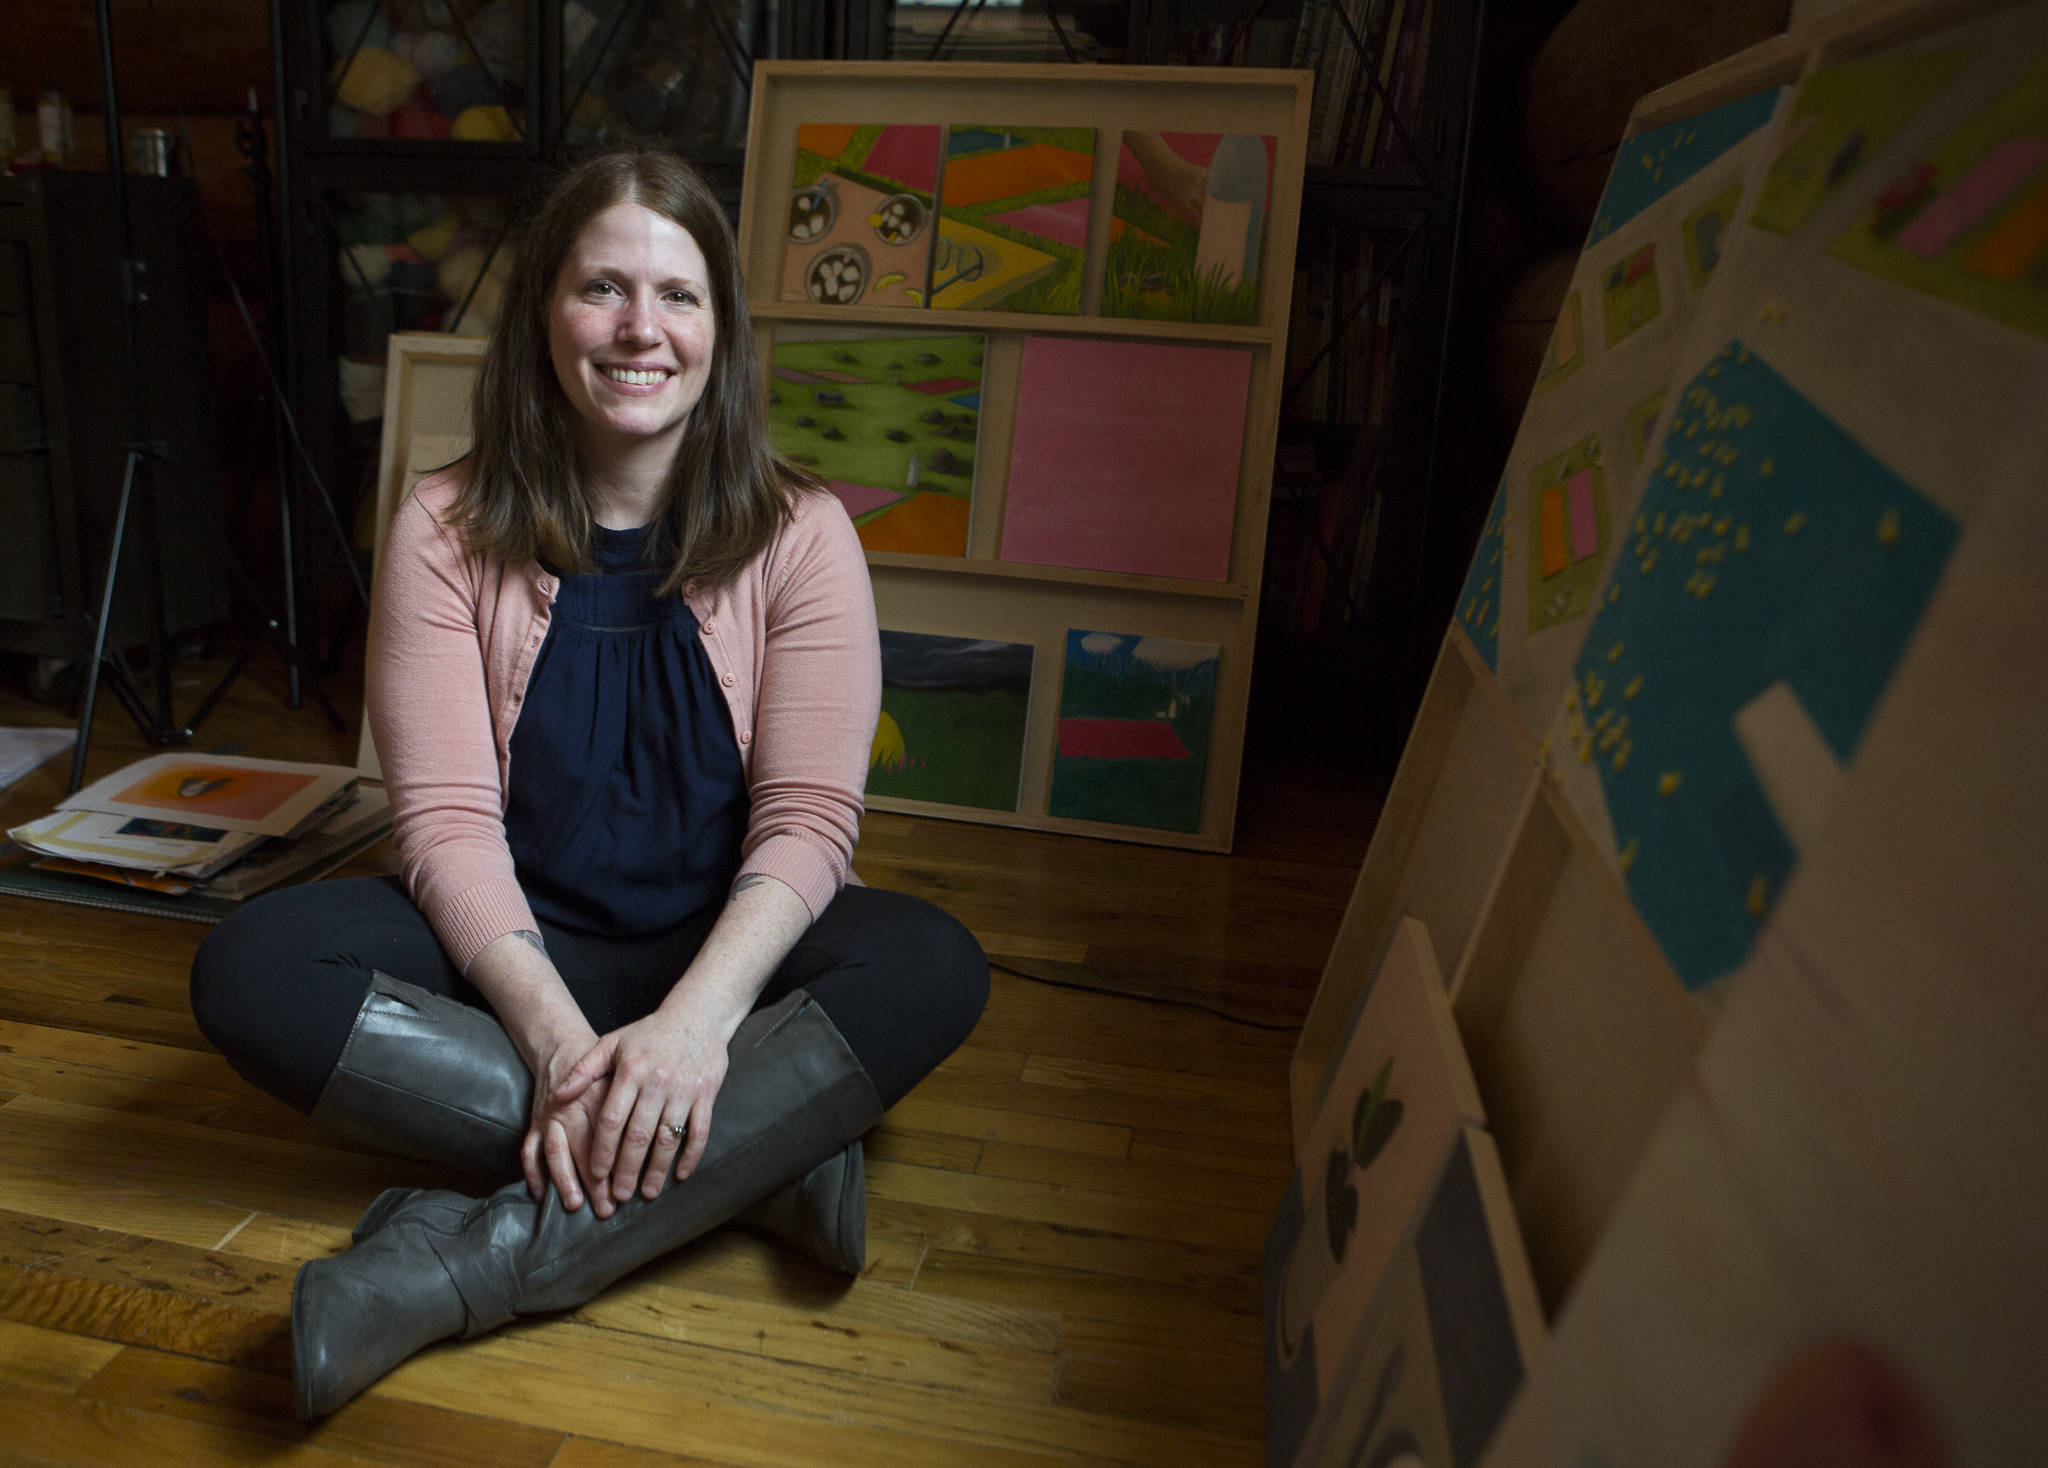 Amanda Adams, seen here in her bedroom art studio at her Monroe home, specializes in vivid oil paintings that range from surreal to representational. (Olivia Vanni / The Herald)